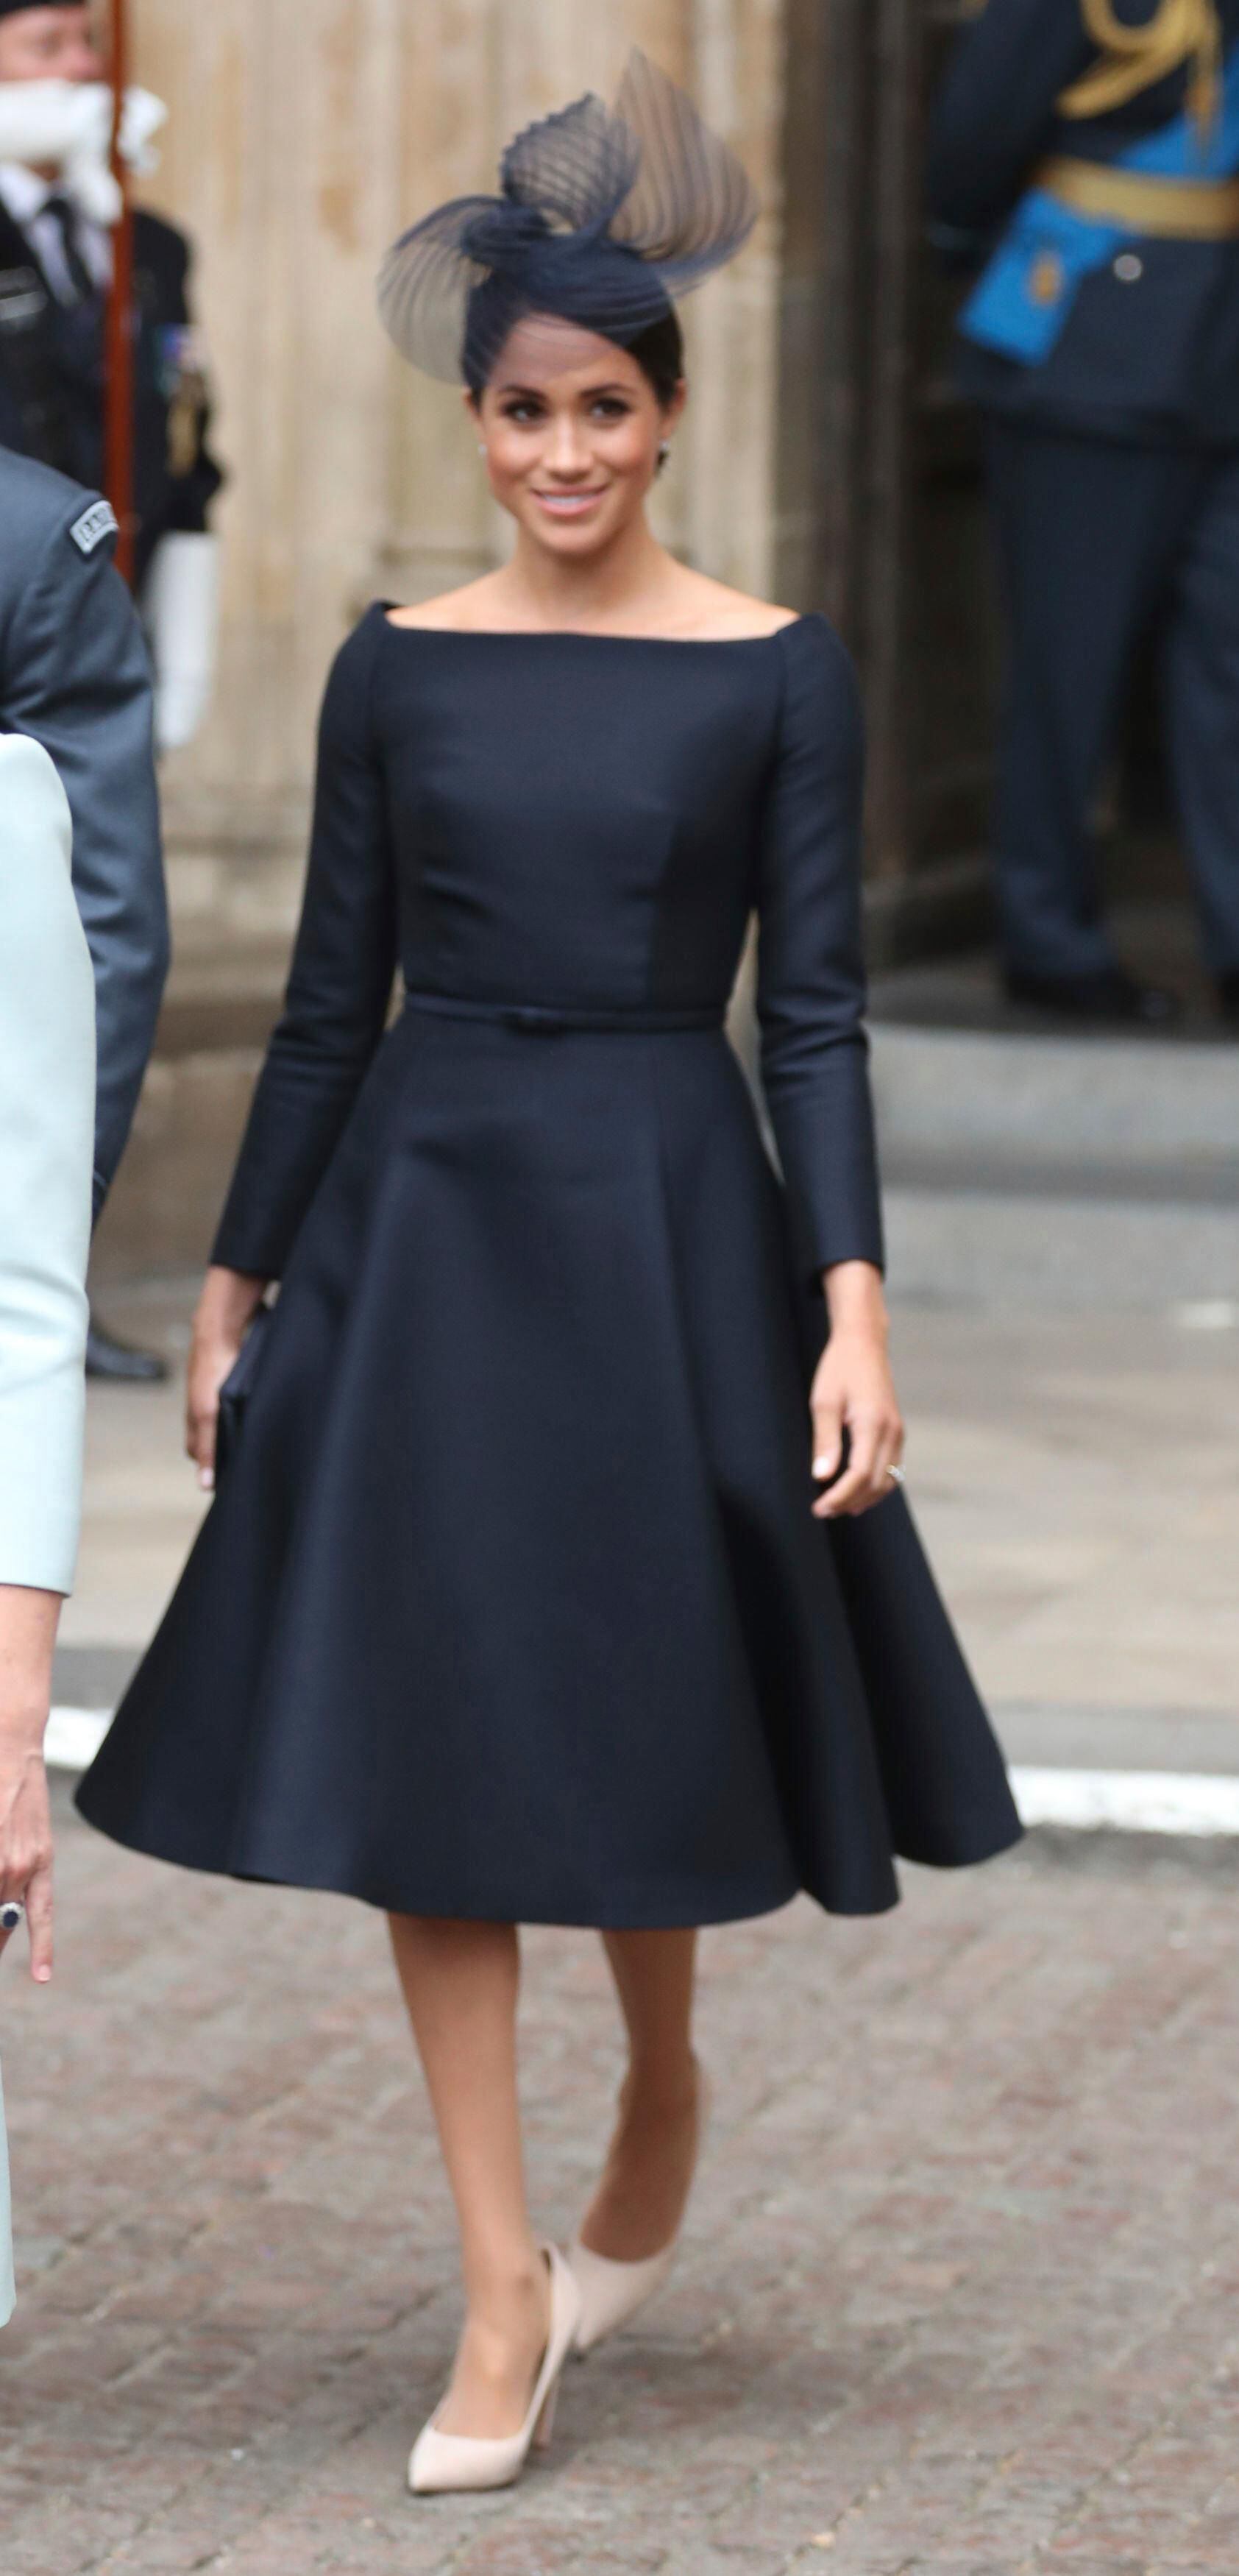 Meghan Markle Haute Couture - A Look at her Christian Dior Dress